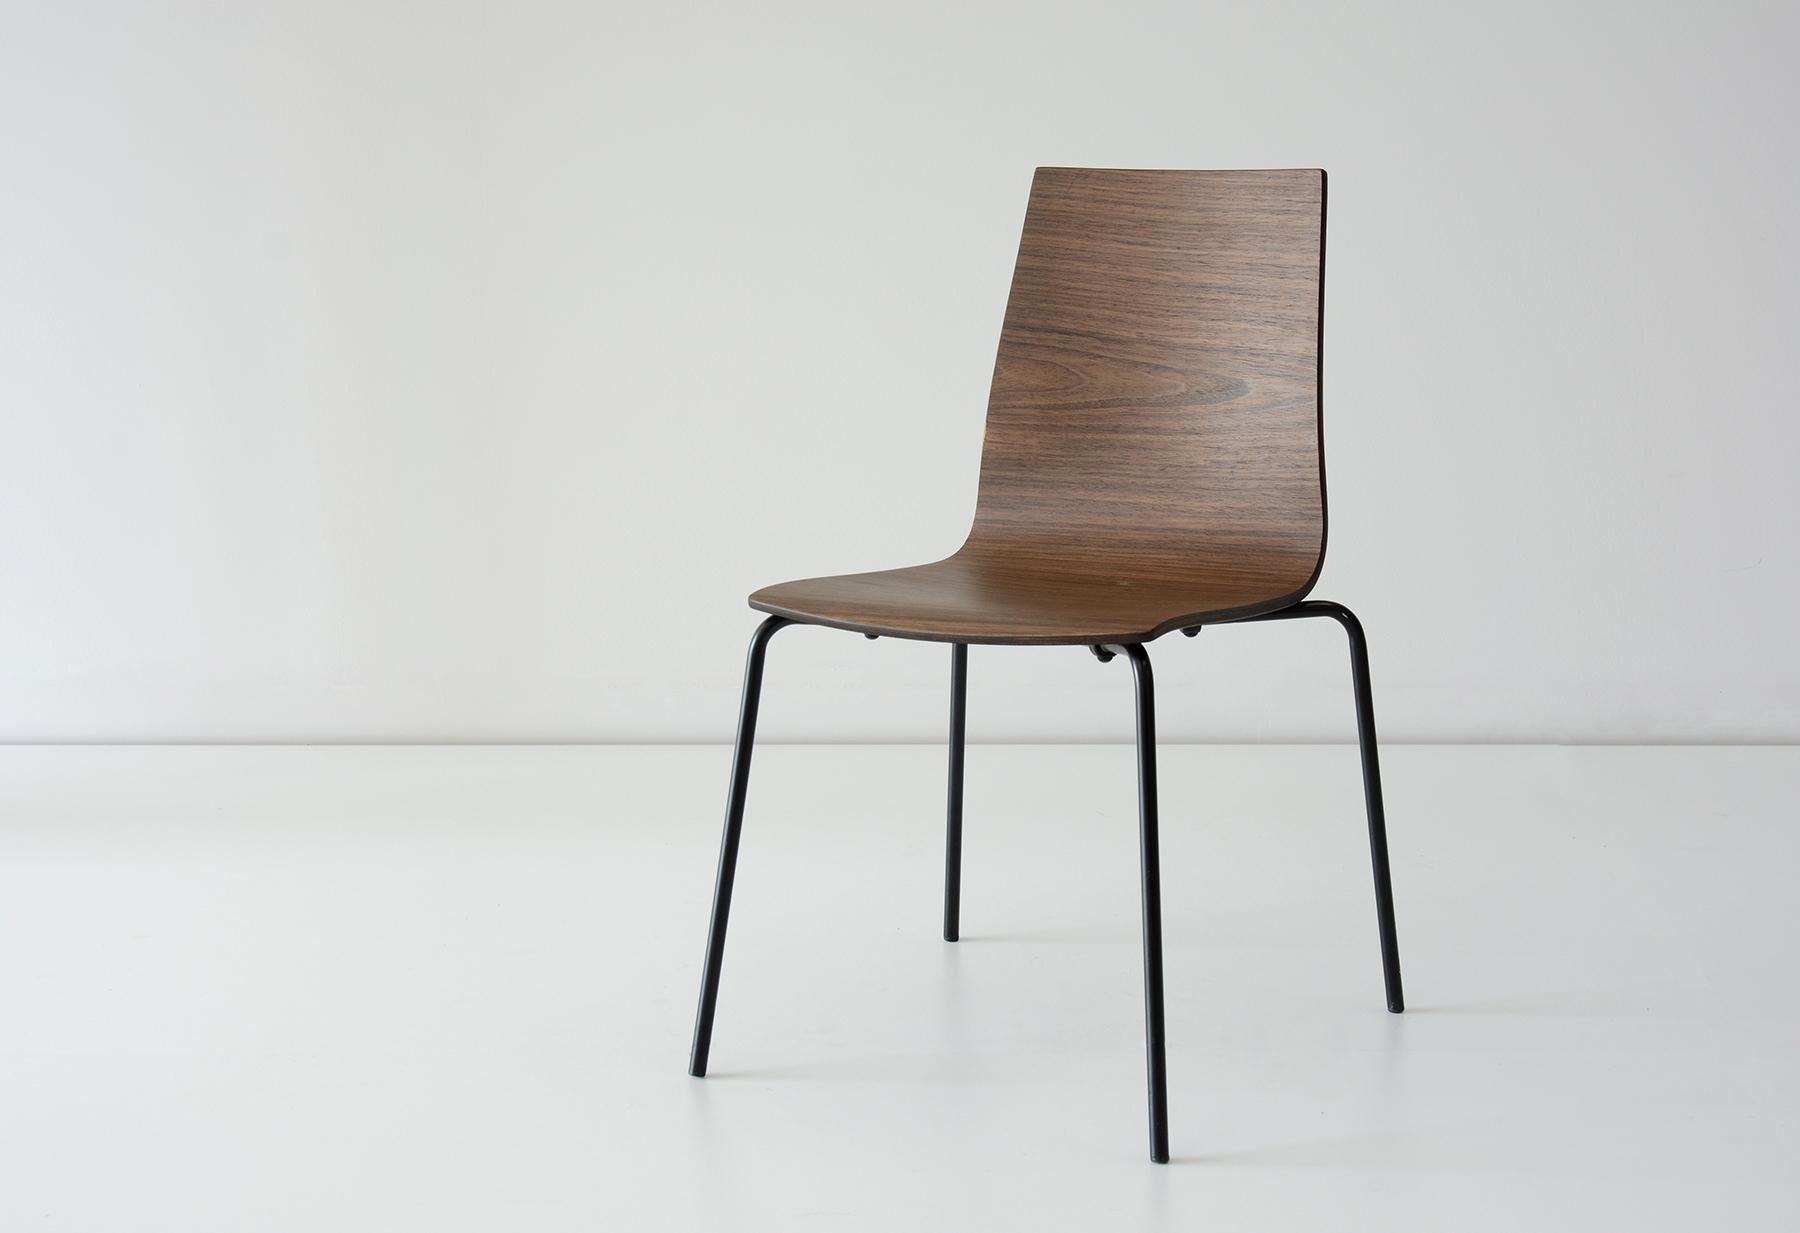 Walnut Wallace chair by Hollis & Morris
Dimensions: 19